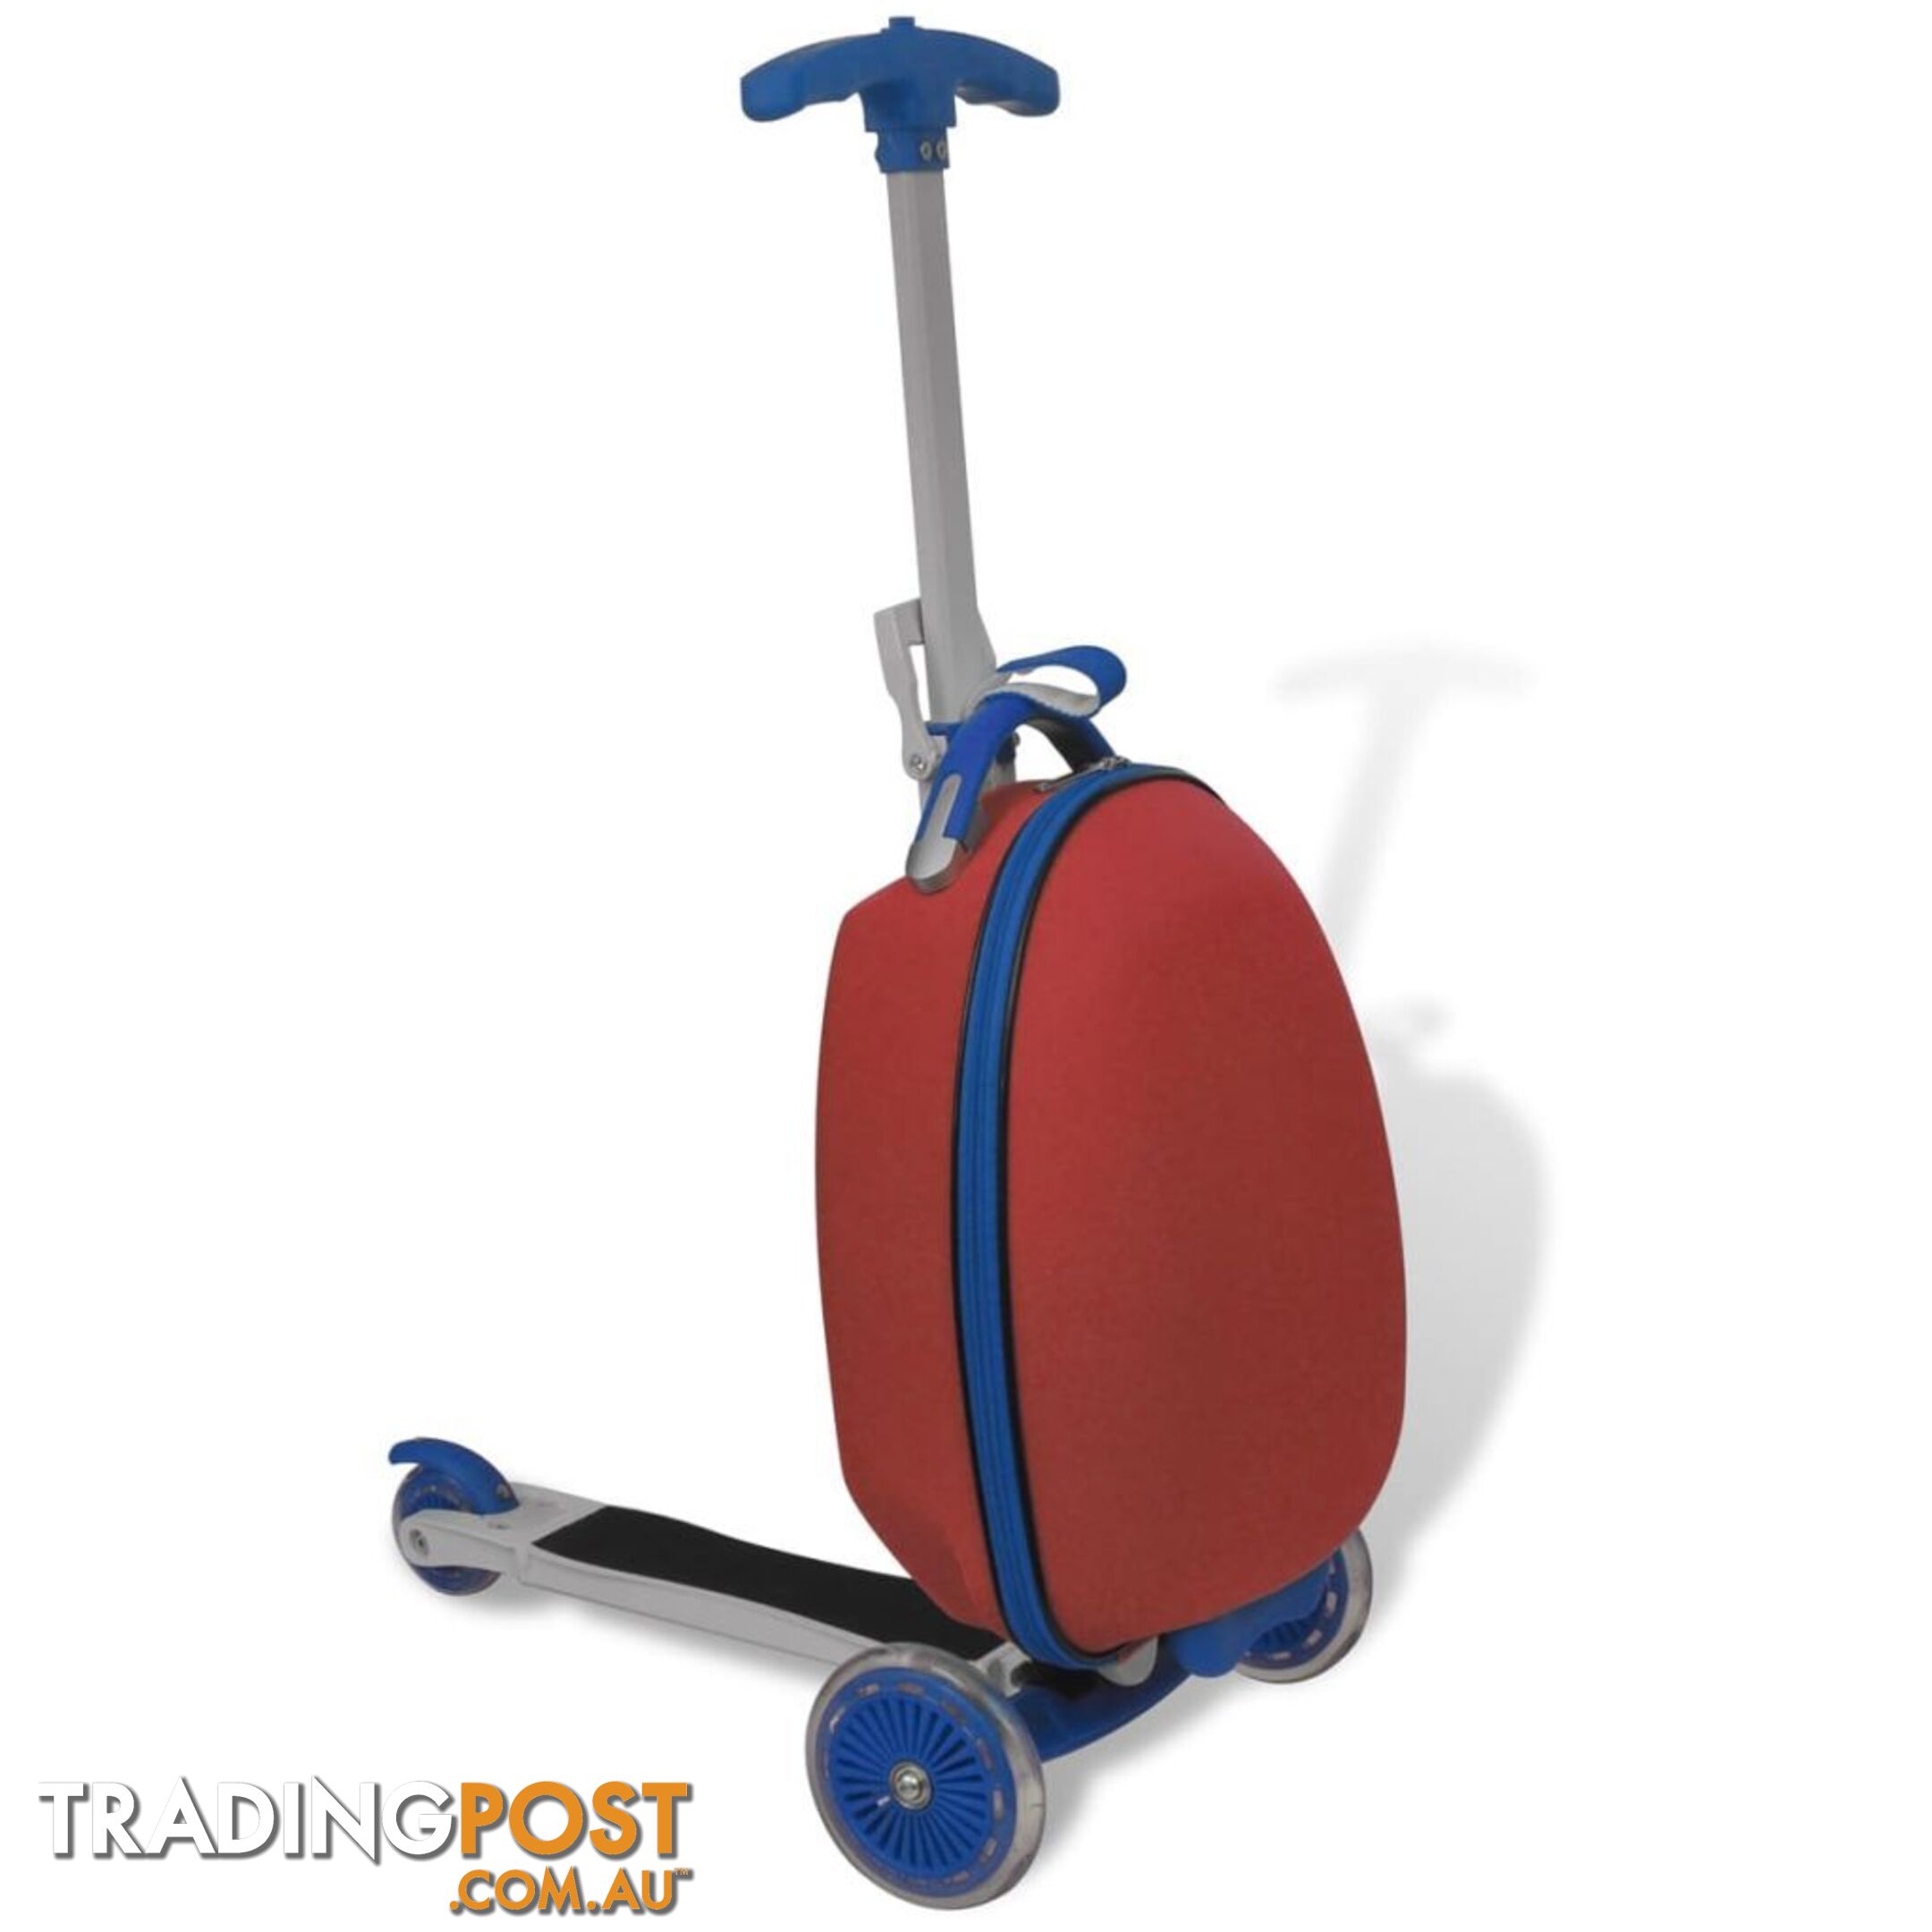 Trolley Case with Scooter for Children - Red - Unbranded - 4326500421524